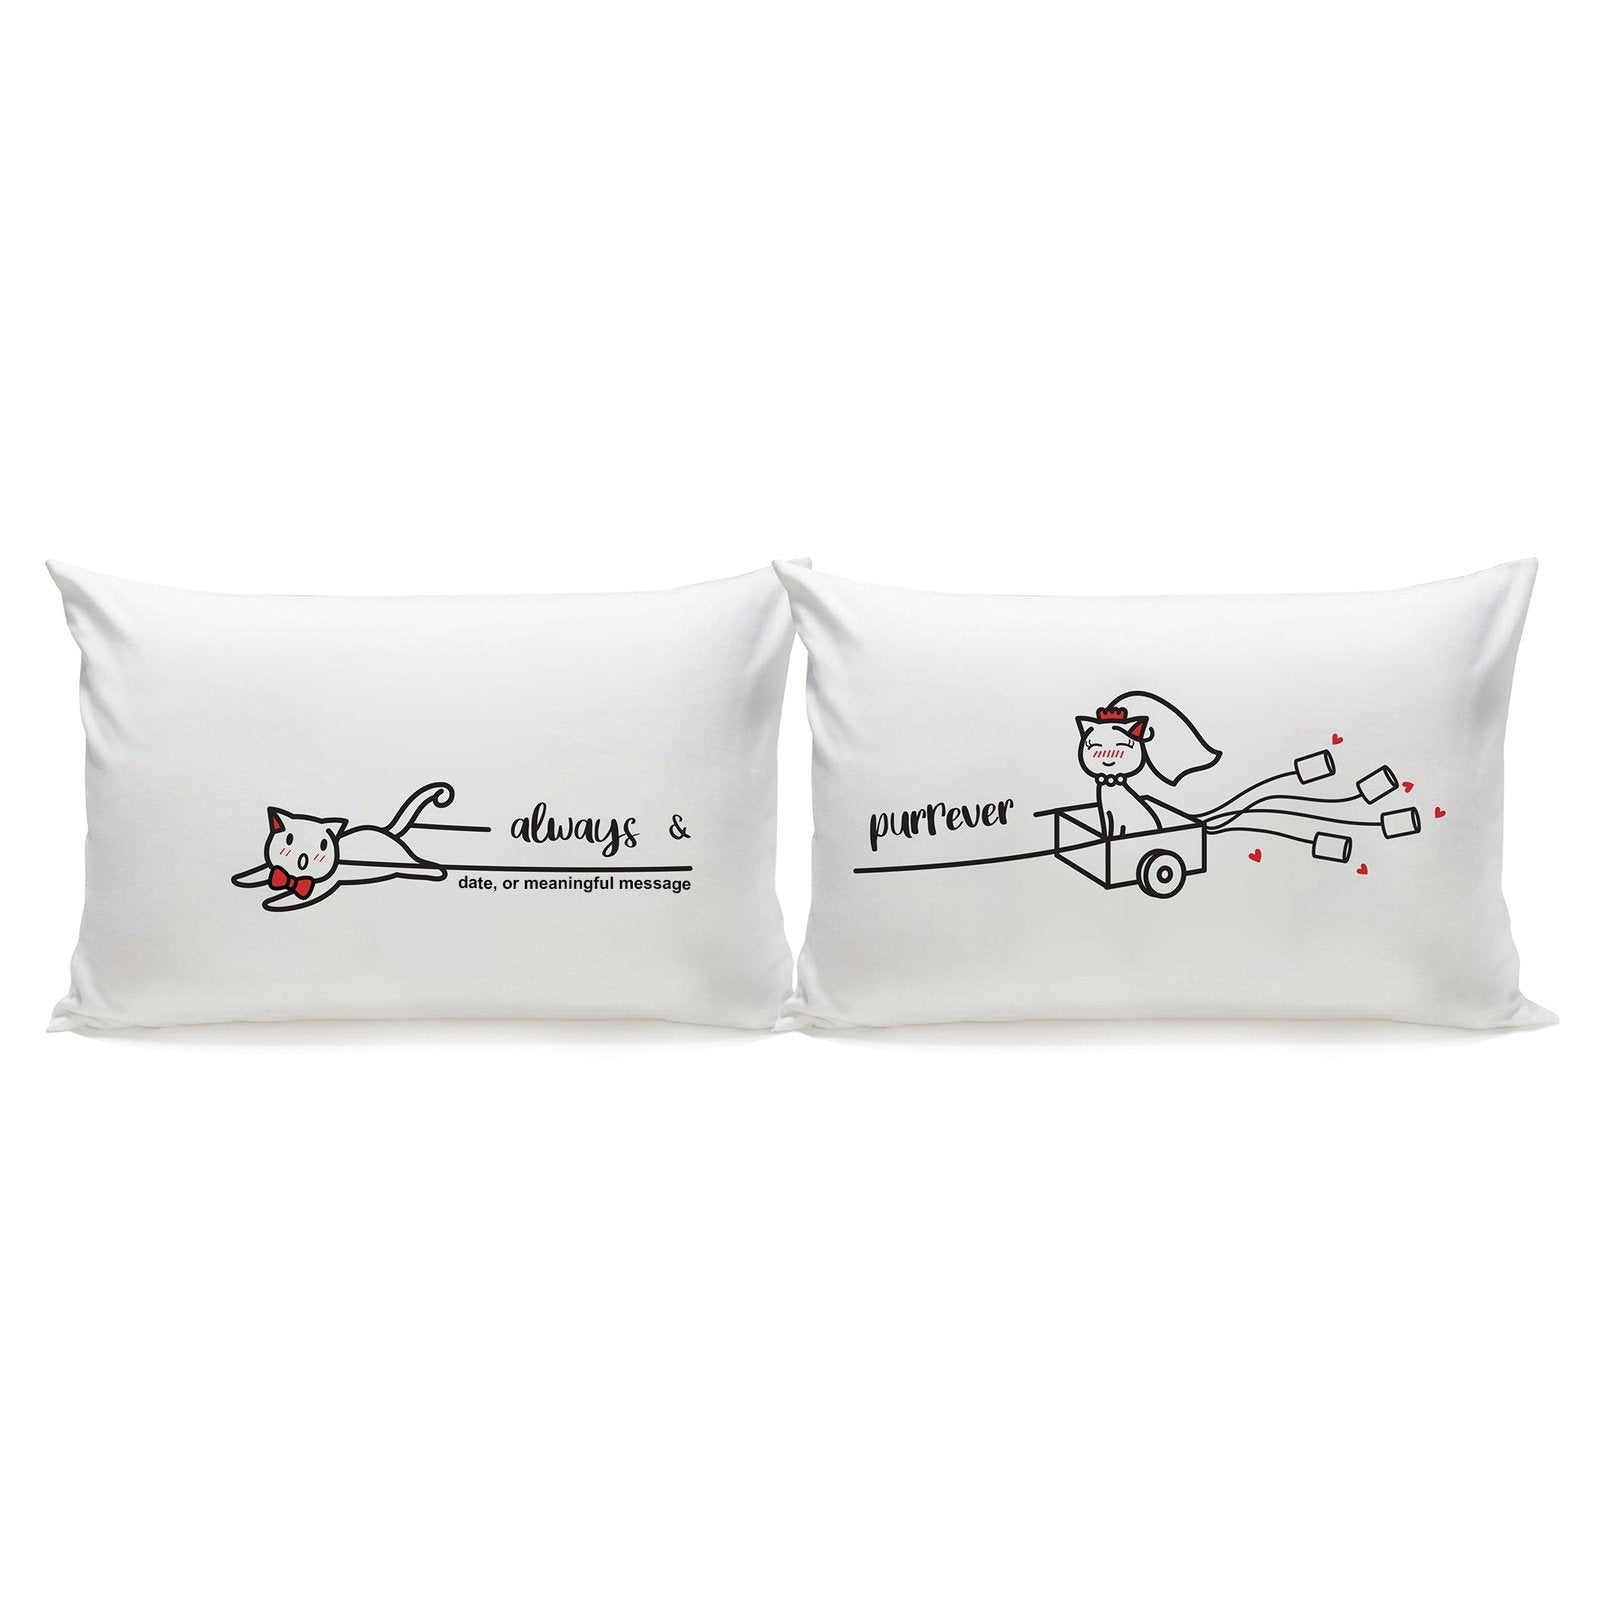 Get ready to inspire romance with a pair of beautifully designed pillows - the perfect anniversary gift for couples or cherished present for him/her.